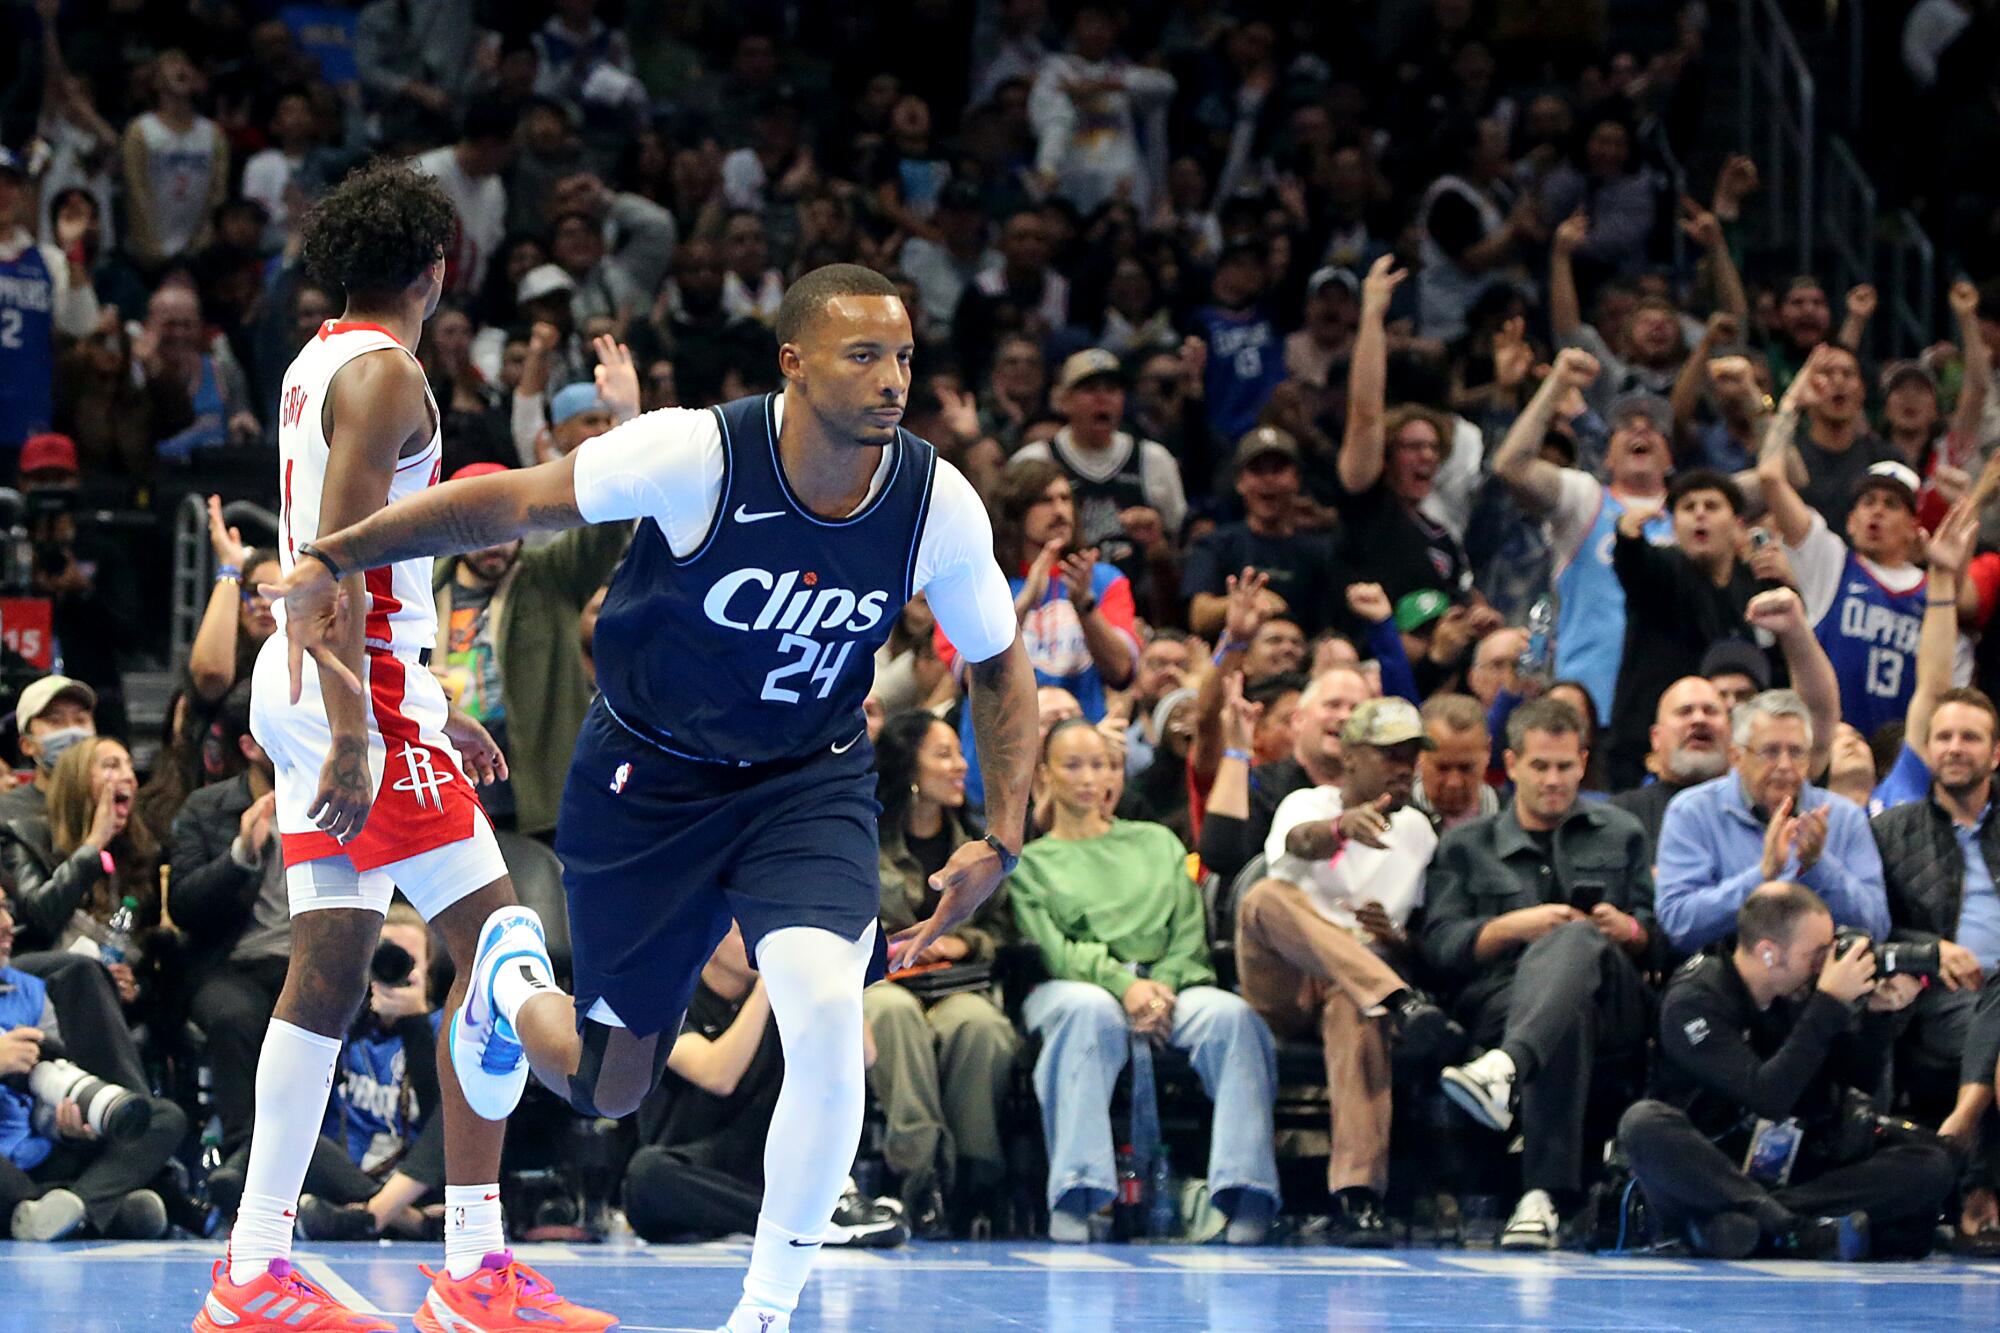 Clippers guard Norman Powell celebrates after hitting a three-pointer against the Rockets in a 106-100 victory in November